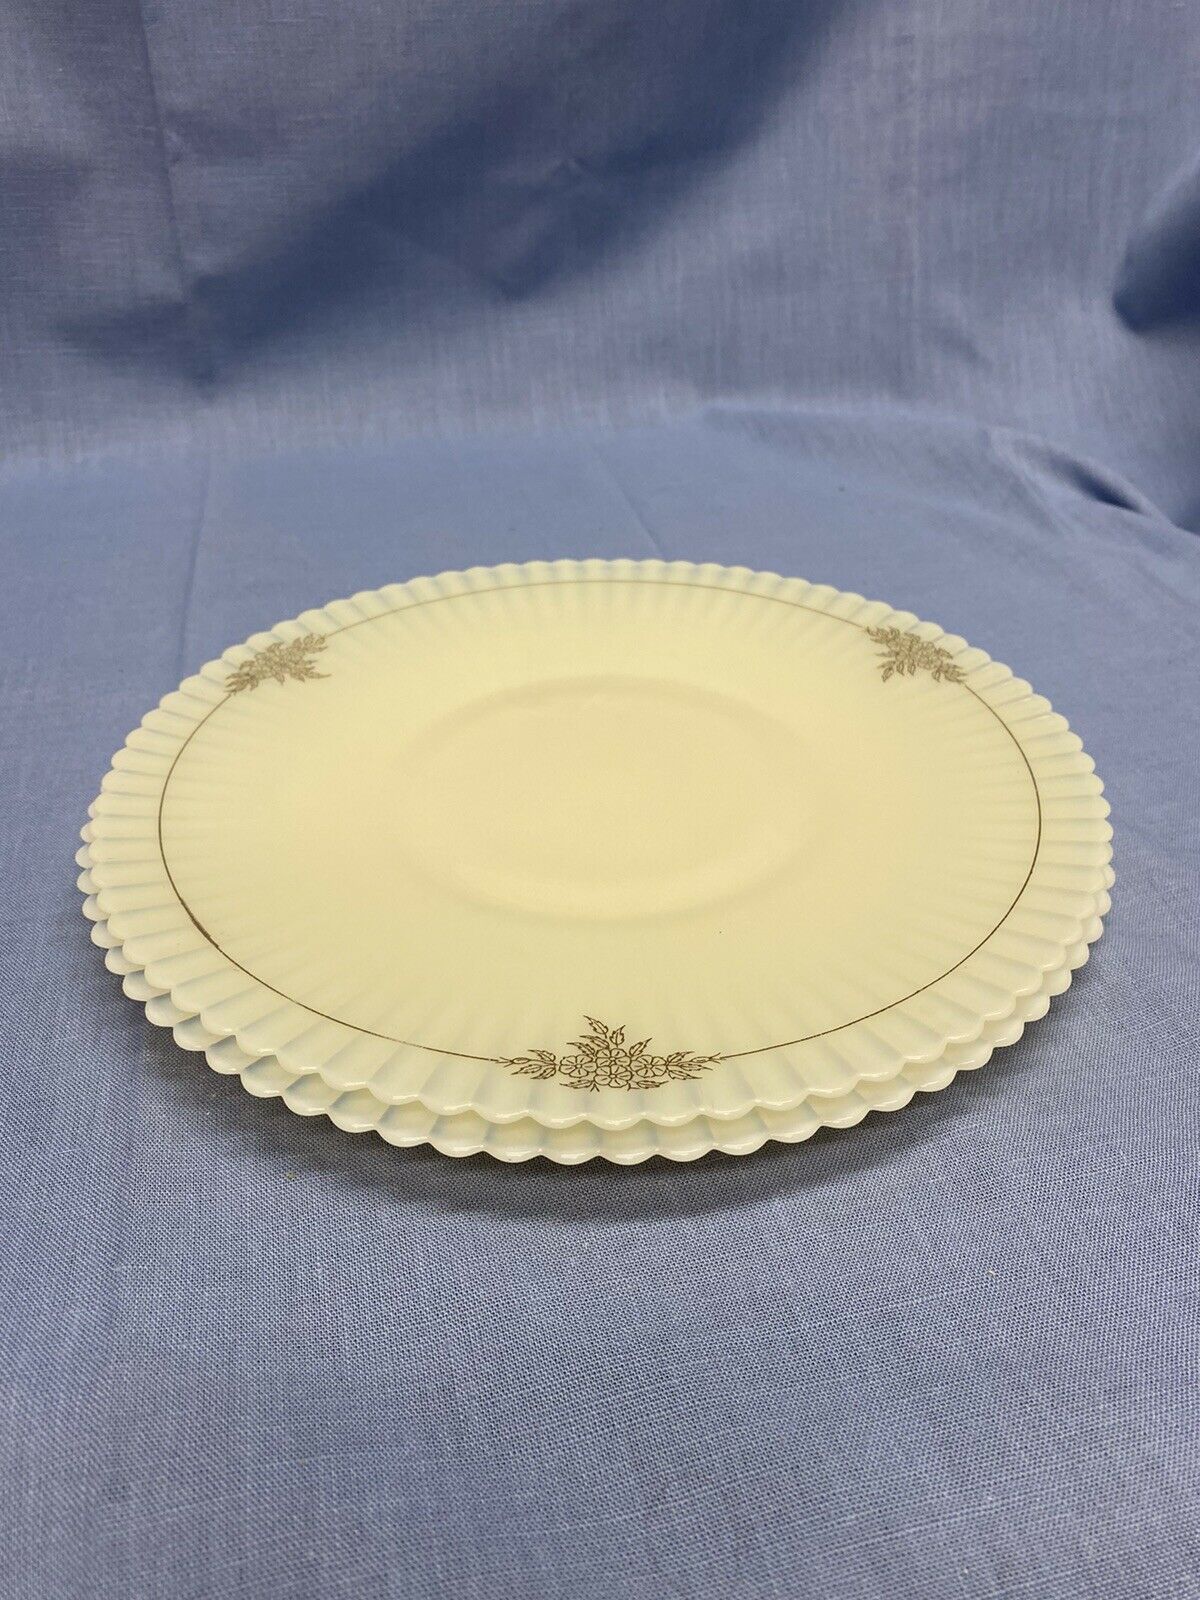 2 Petalware Cremax White Cake Plates With Gold Decal By Macbeth-evans